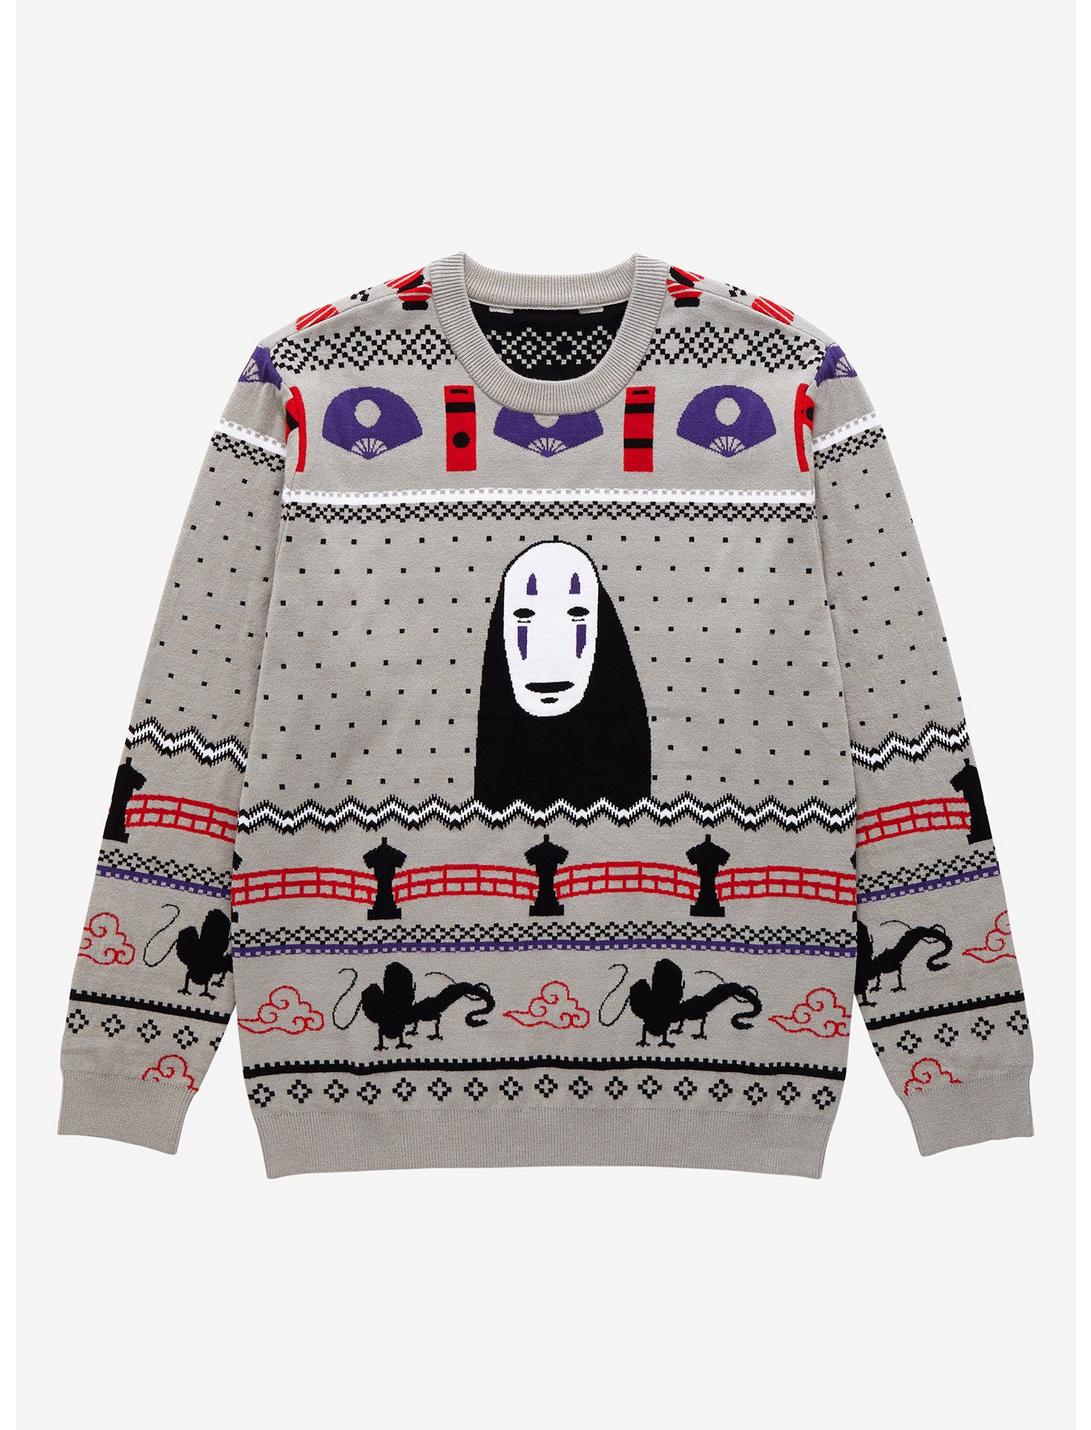 Her Universe Studio Ghibli Spirited Away No Face Holiday Sweater - BoxLunch Exclusive, GREY, hi-res